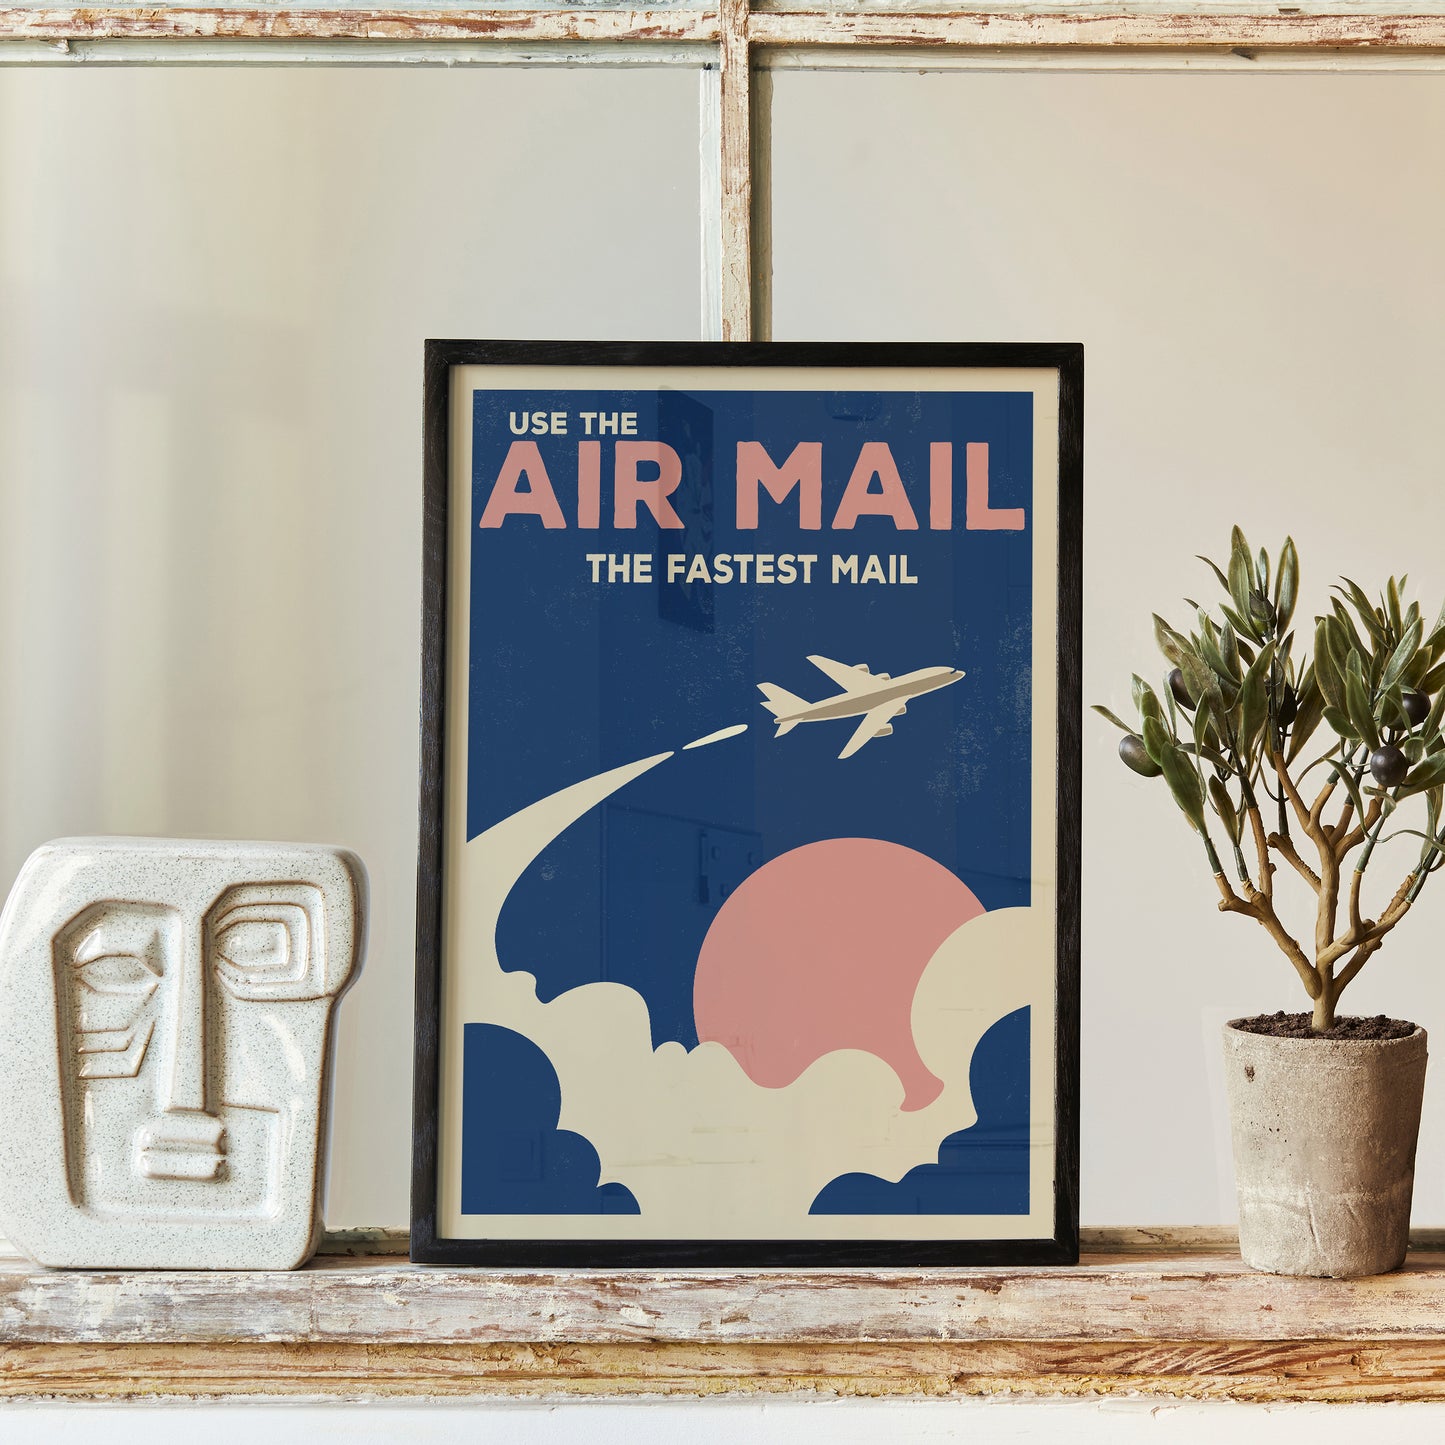 Use The Air Mail vintage advertising poster